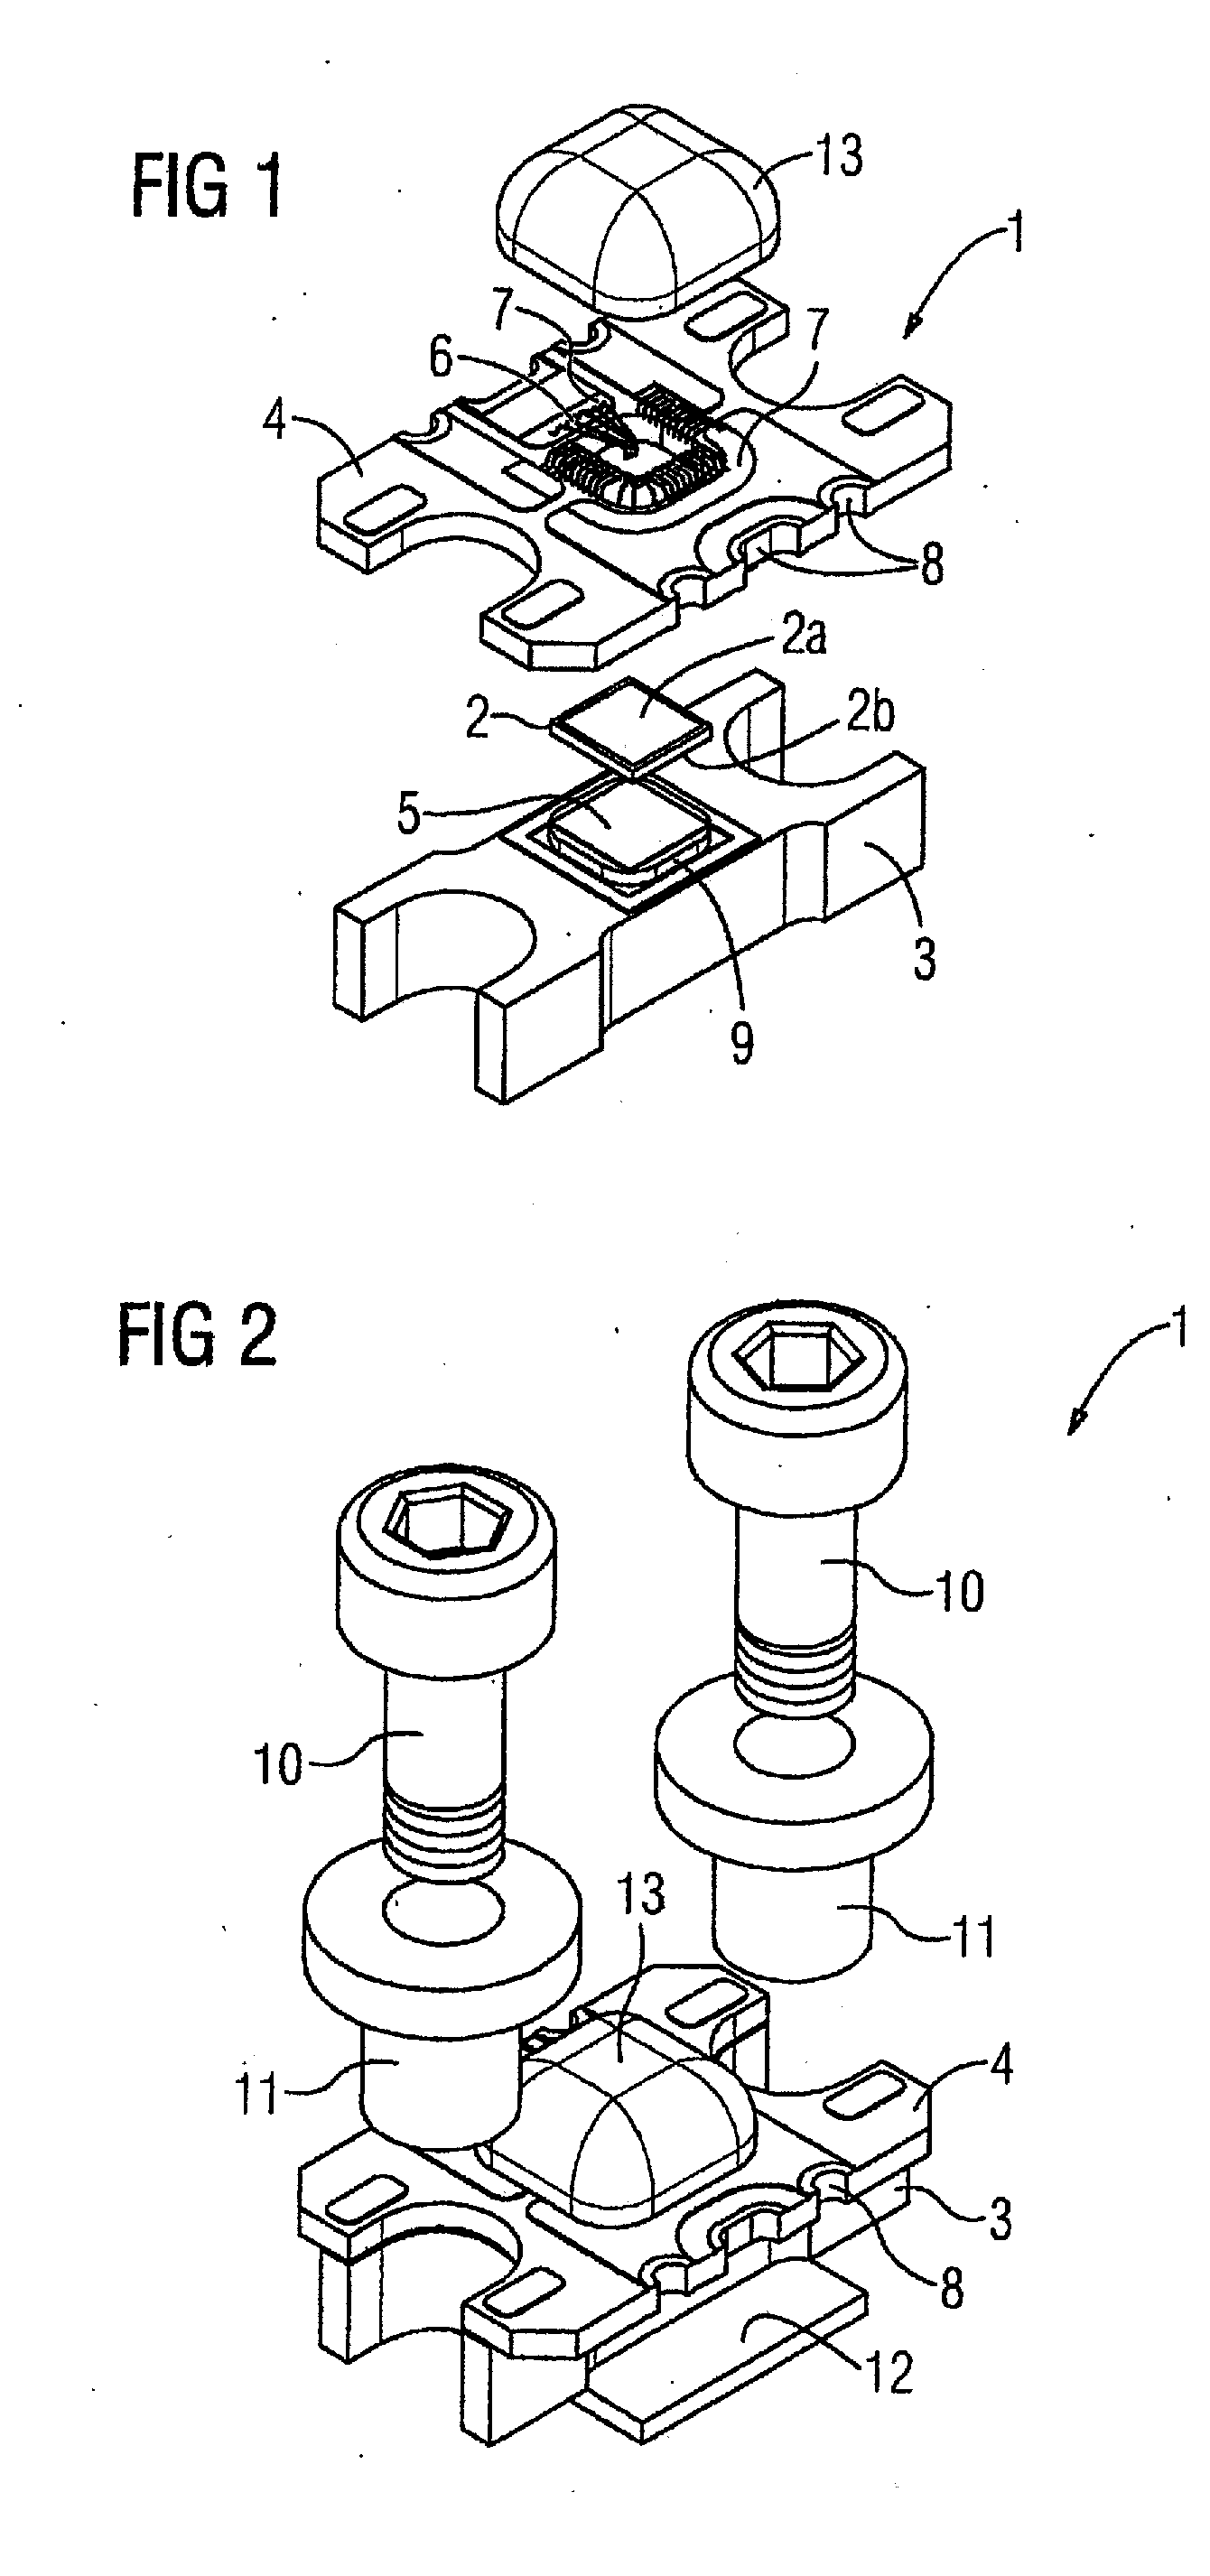 Chip package assembly and method to use the assembly